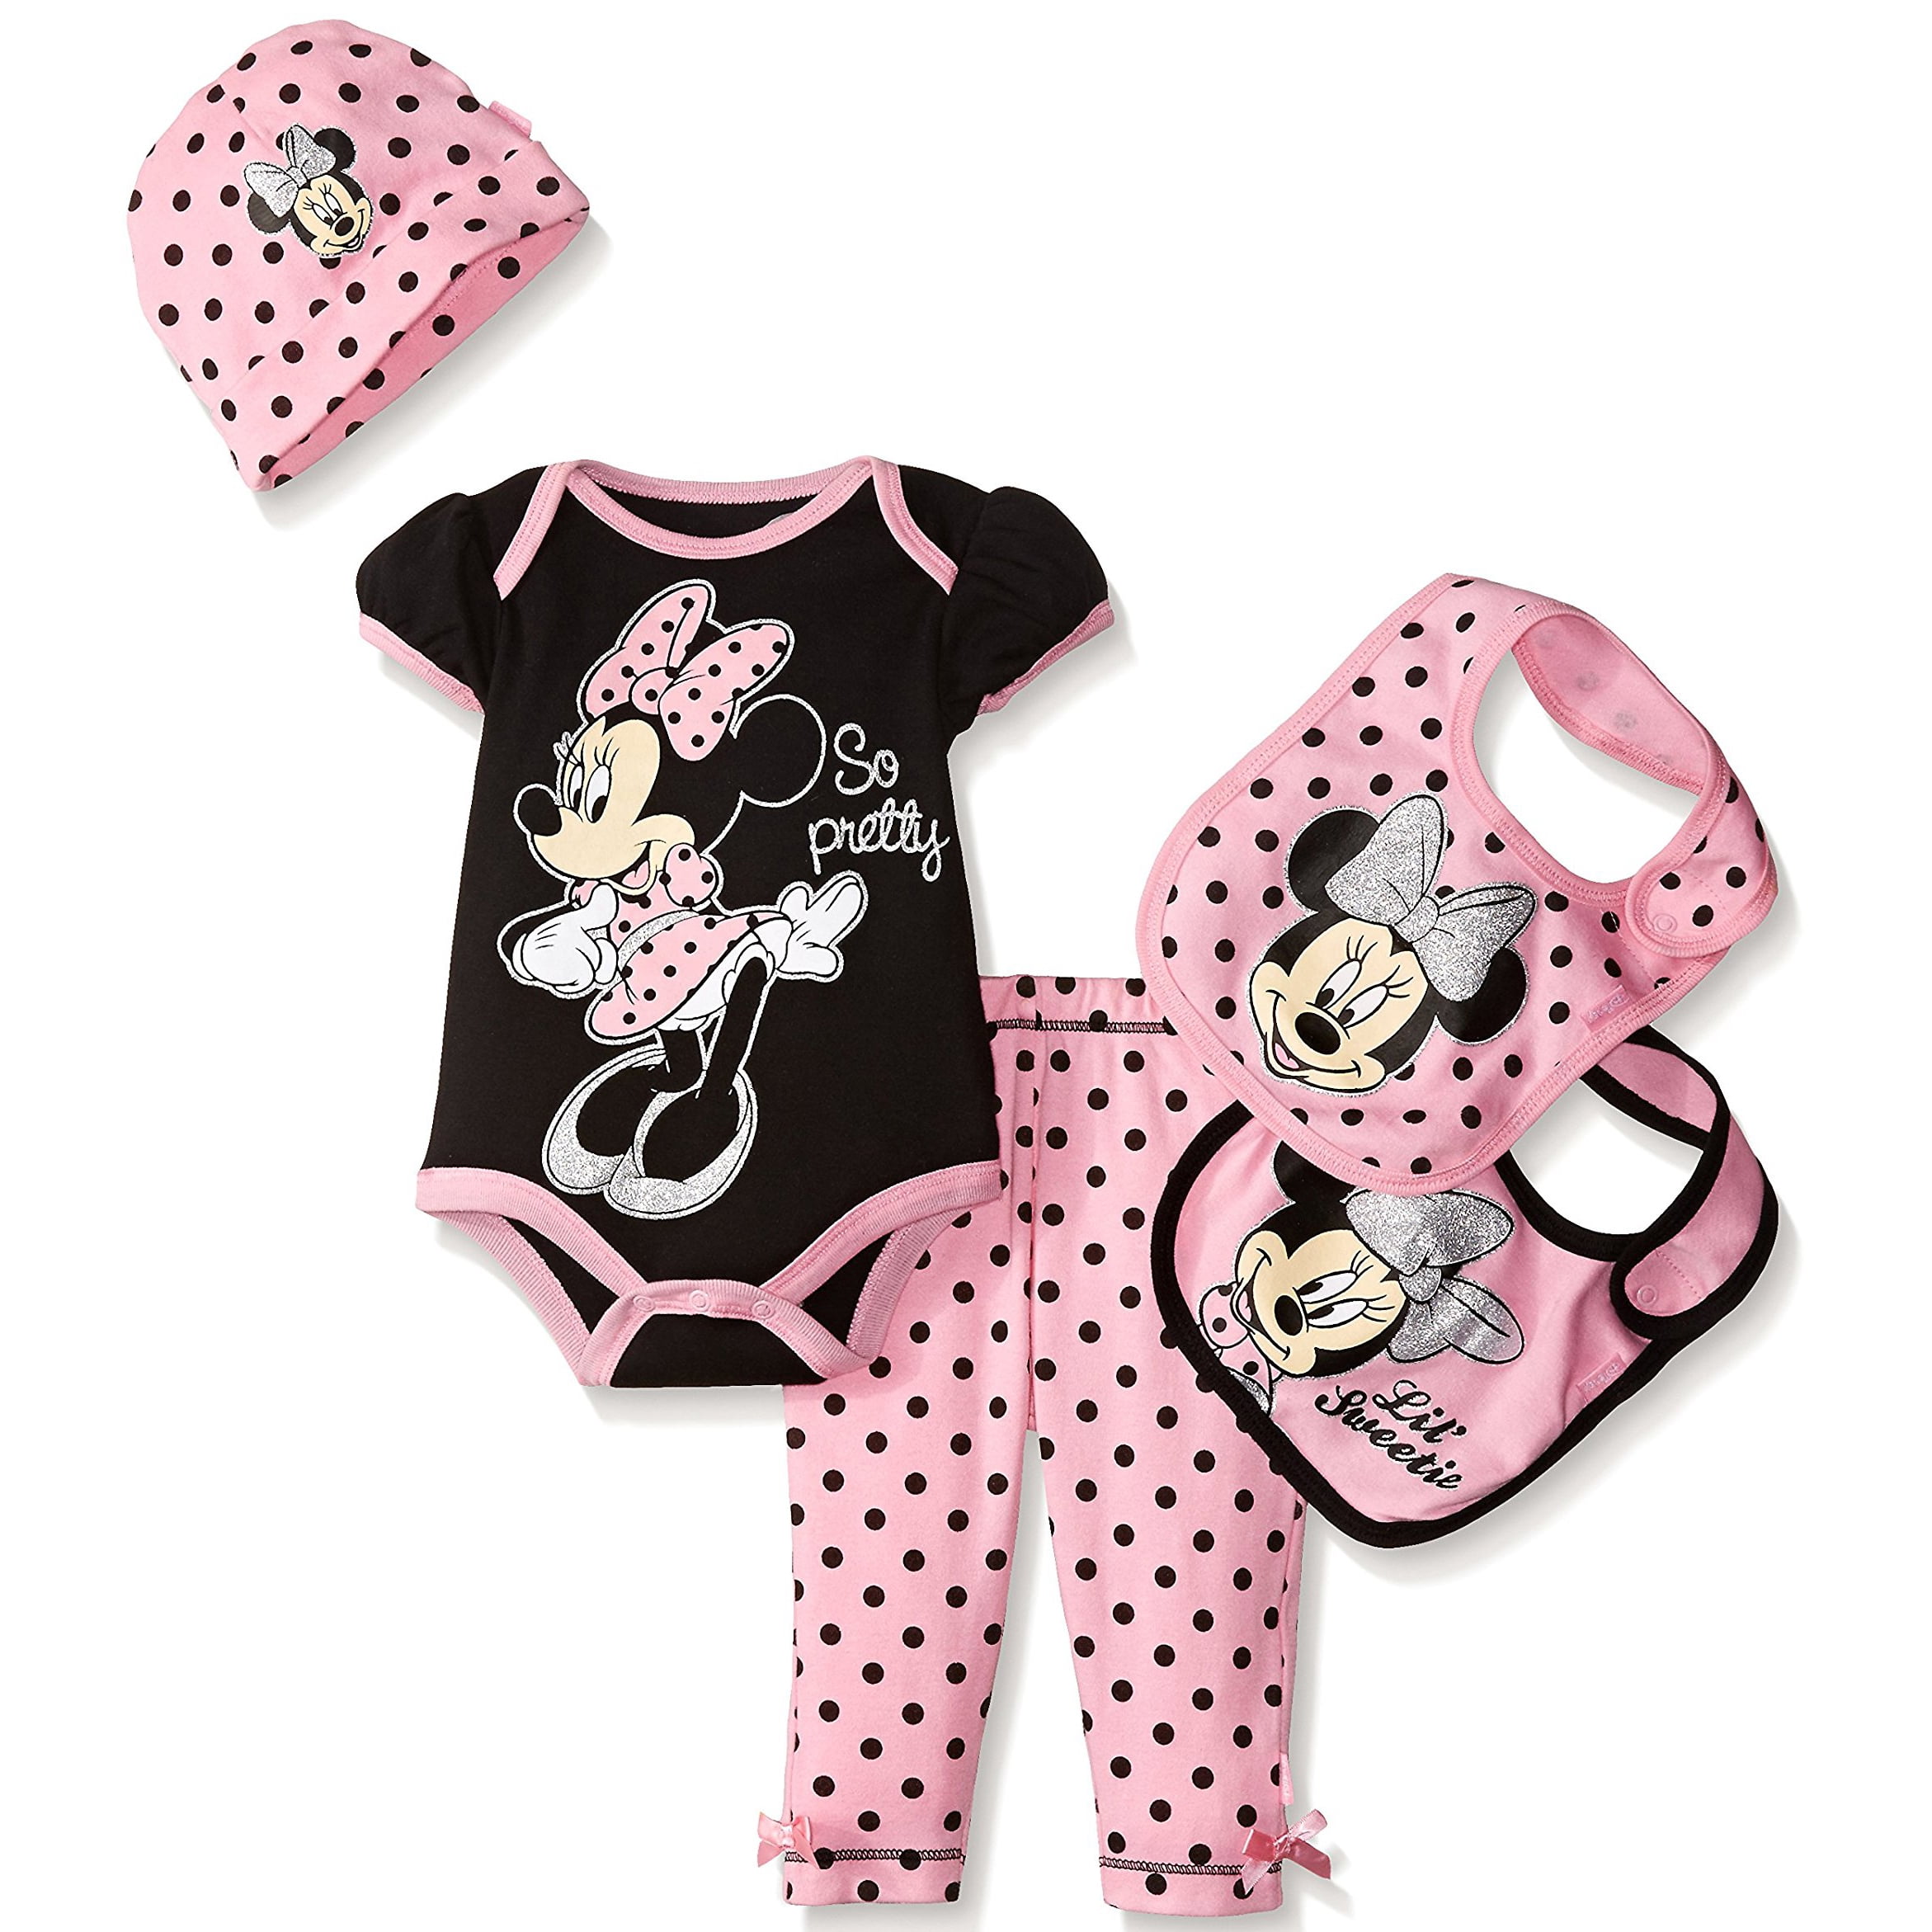 Disney Minnie Mouse Baby Girls' 5 Piece Layette Gift Set Black and Pink